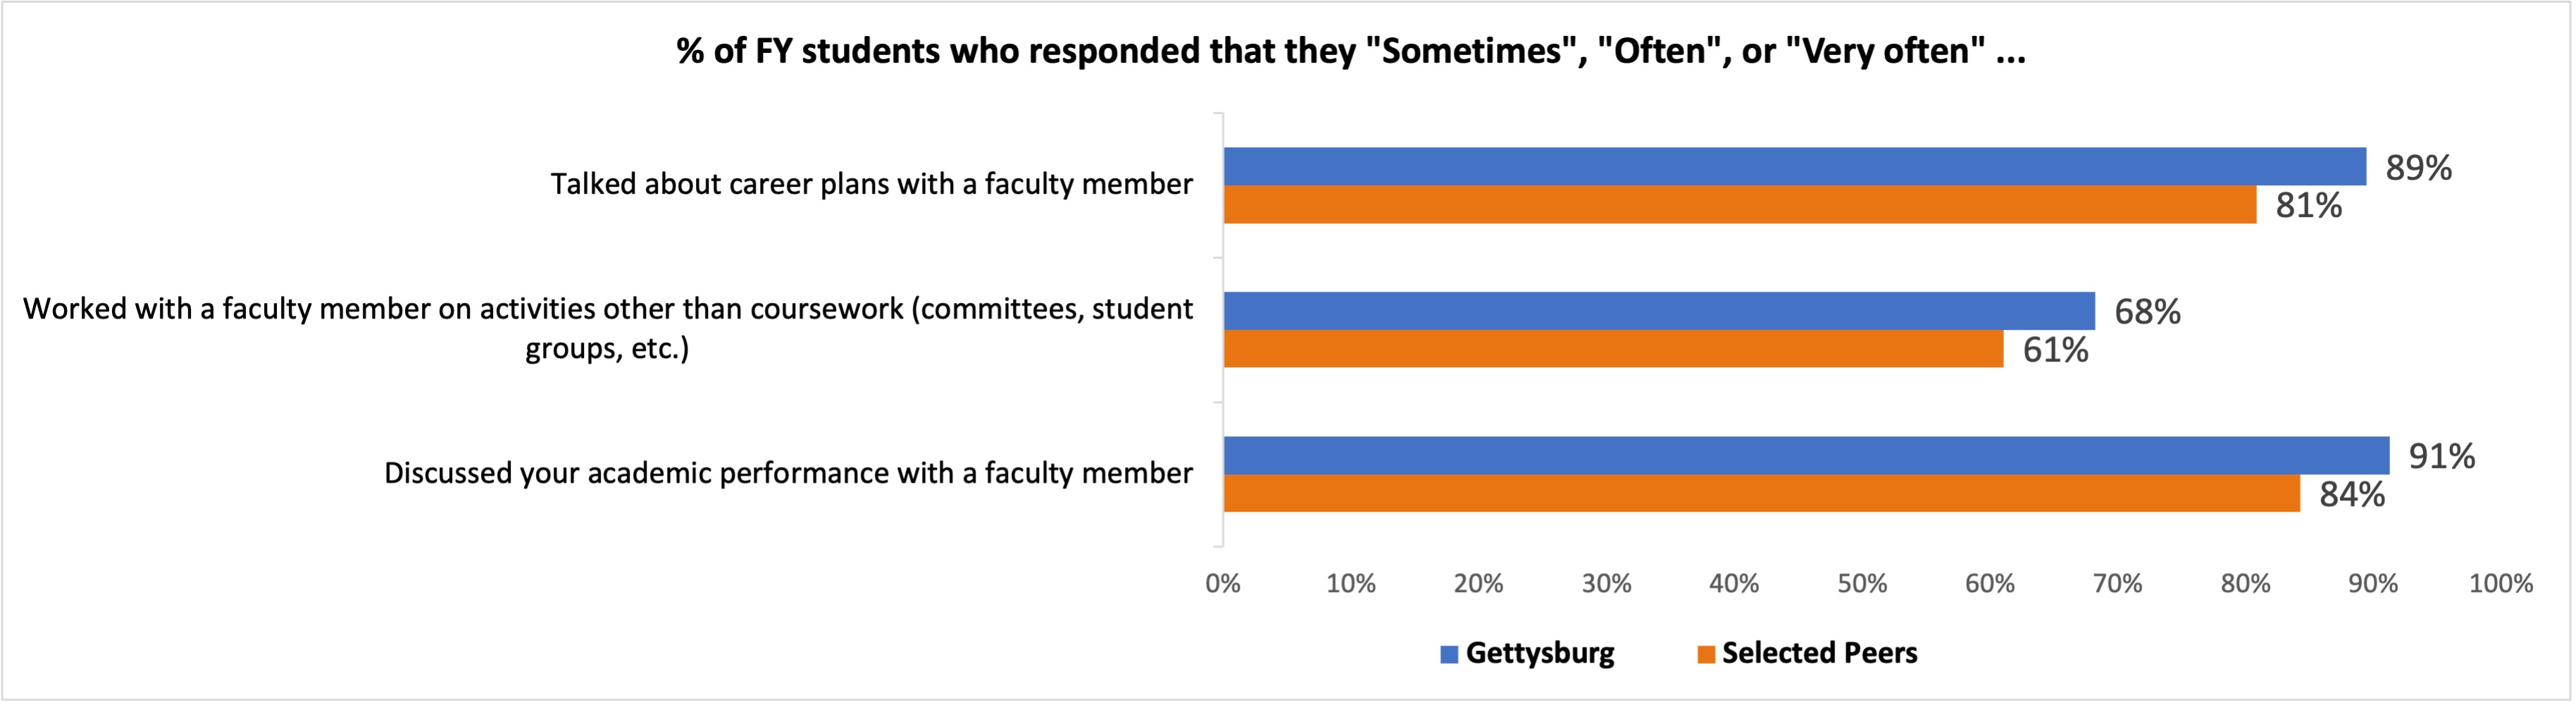 Student-Faculty Interaction chart - see table below for data